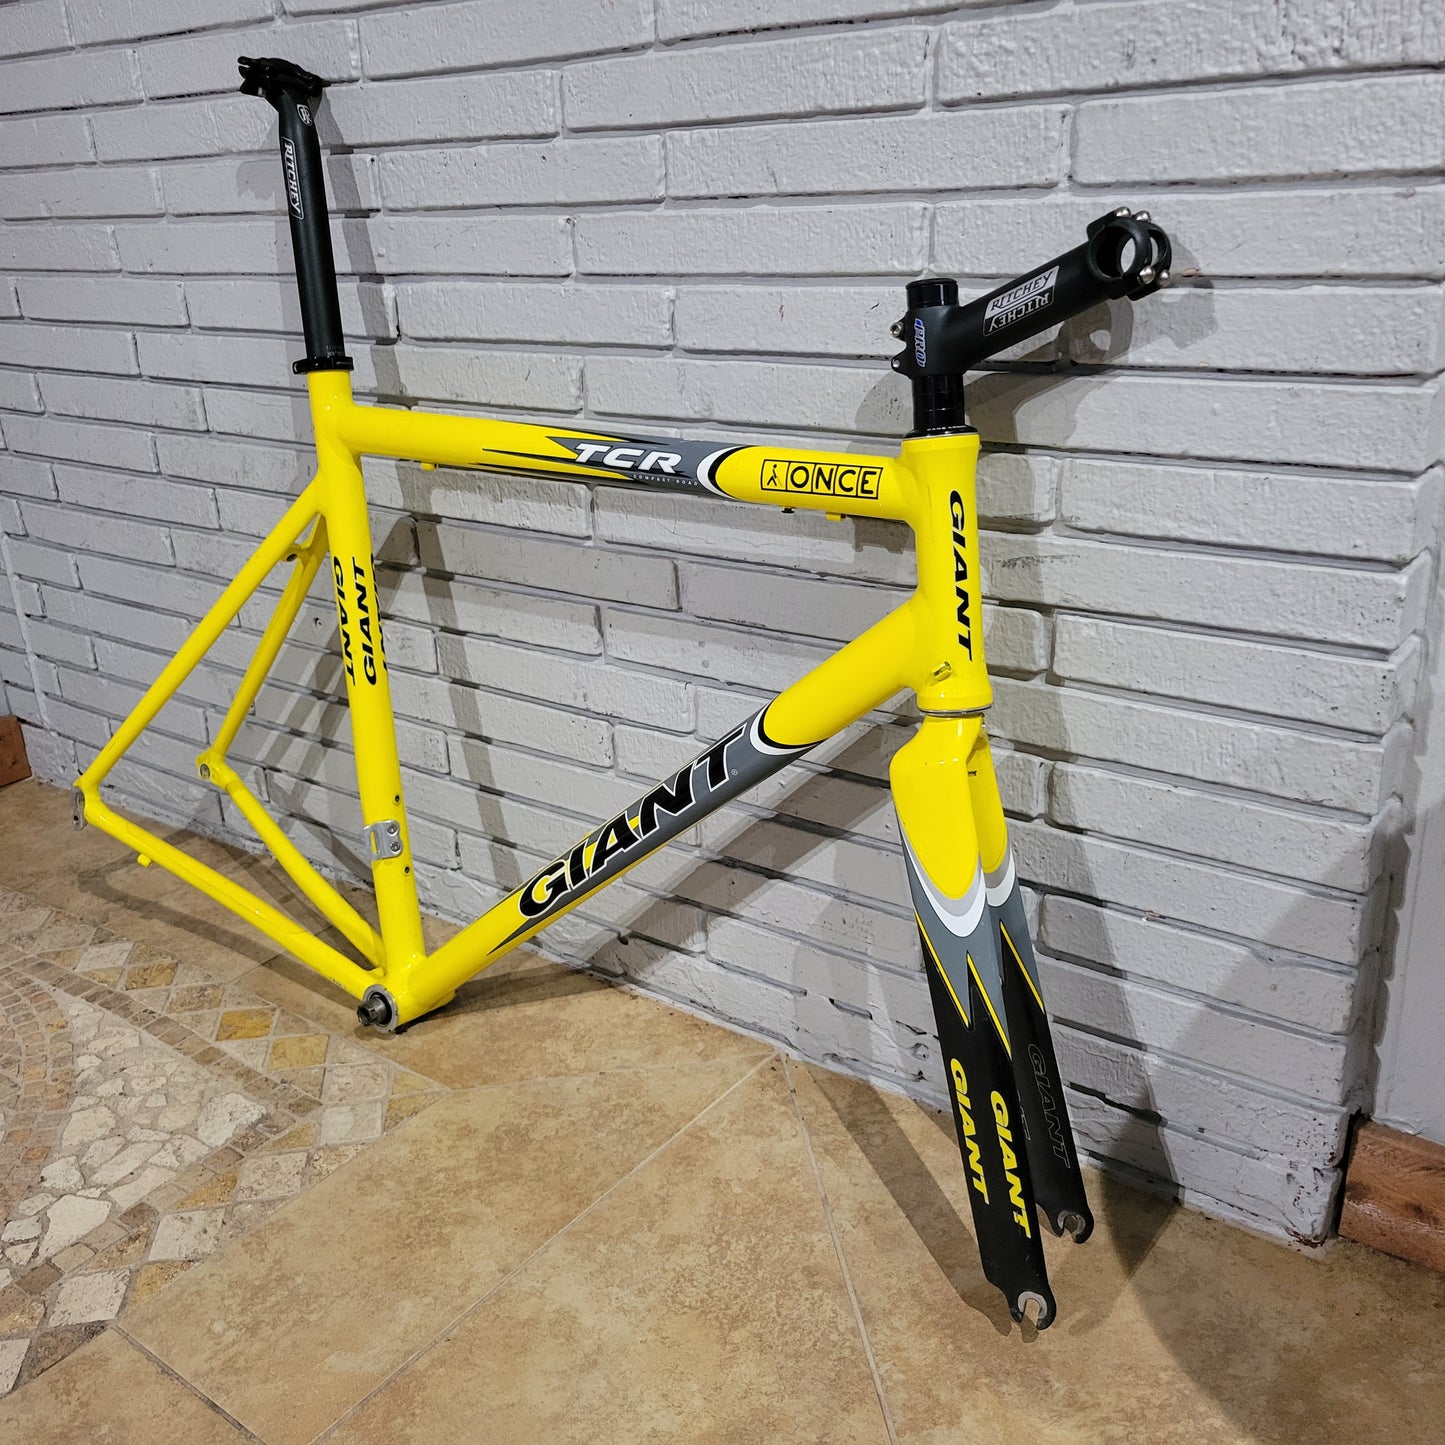 Giant TCR ONCE Frame